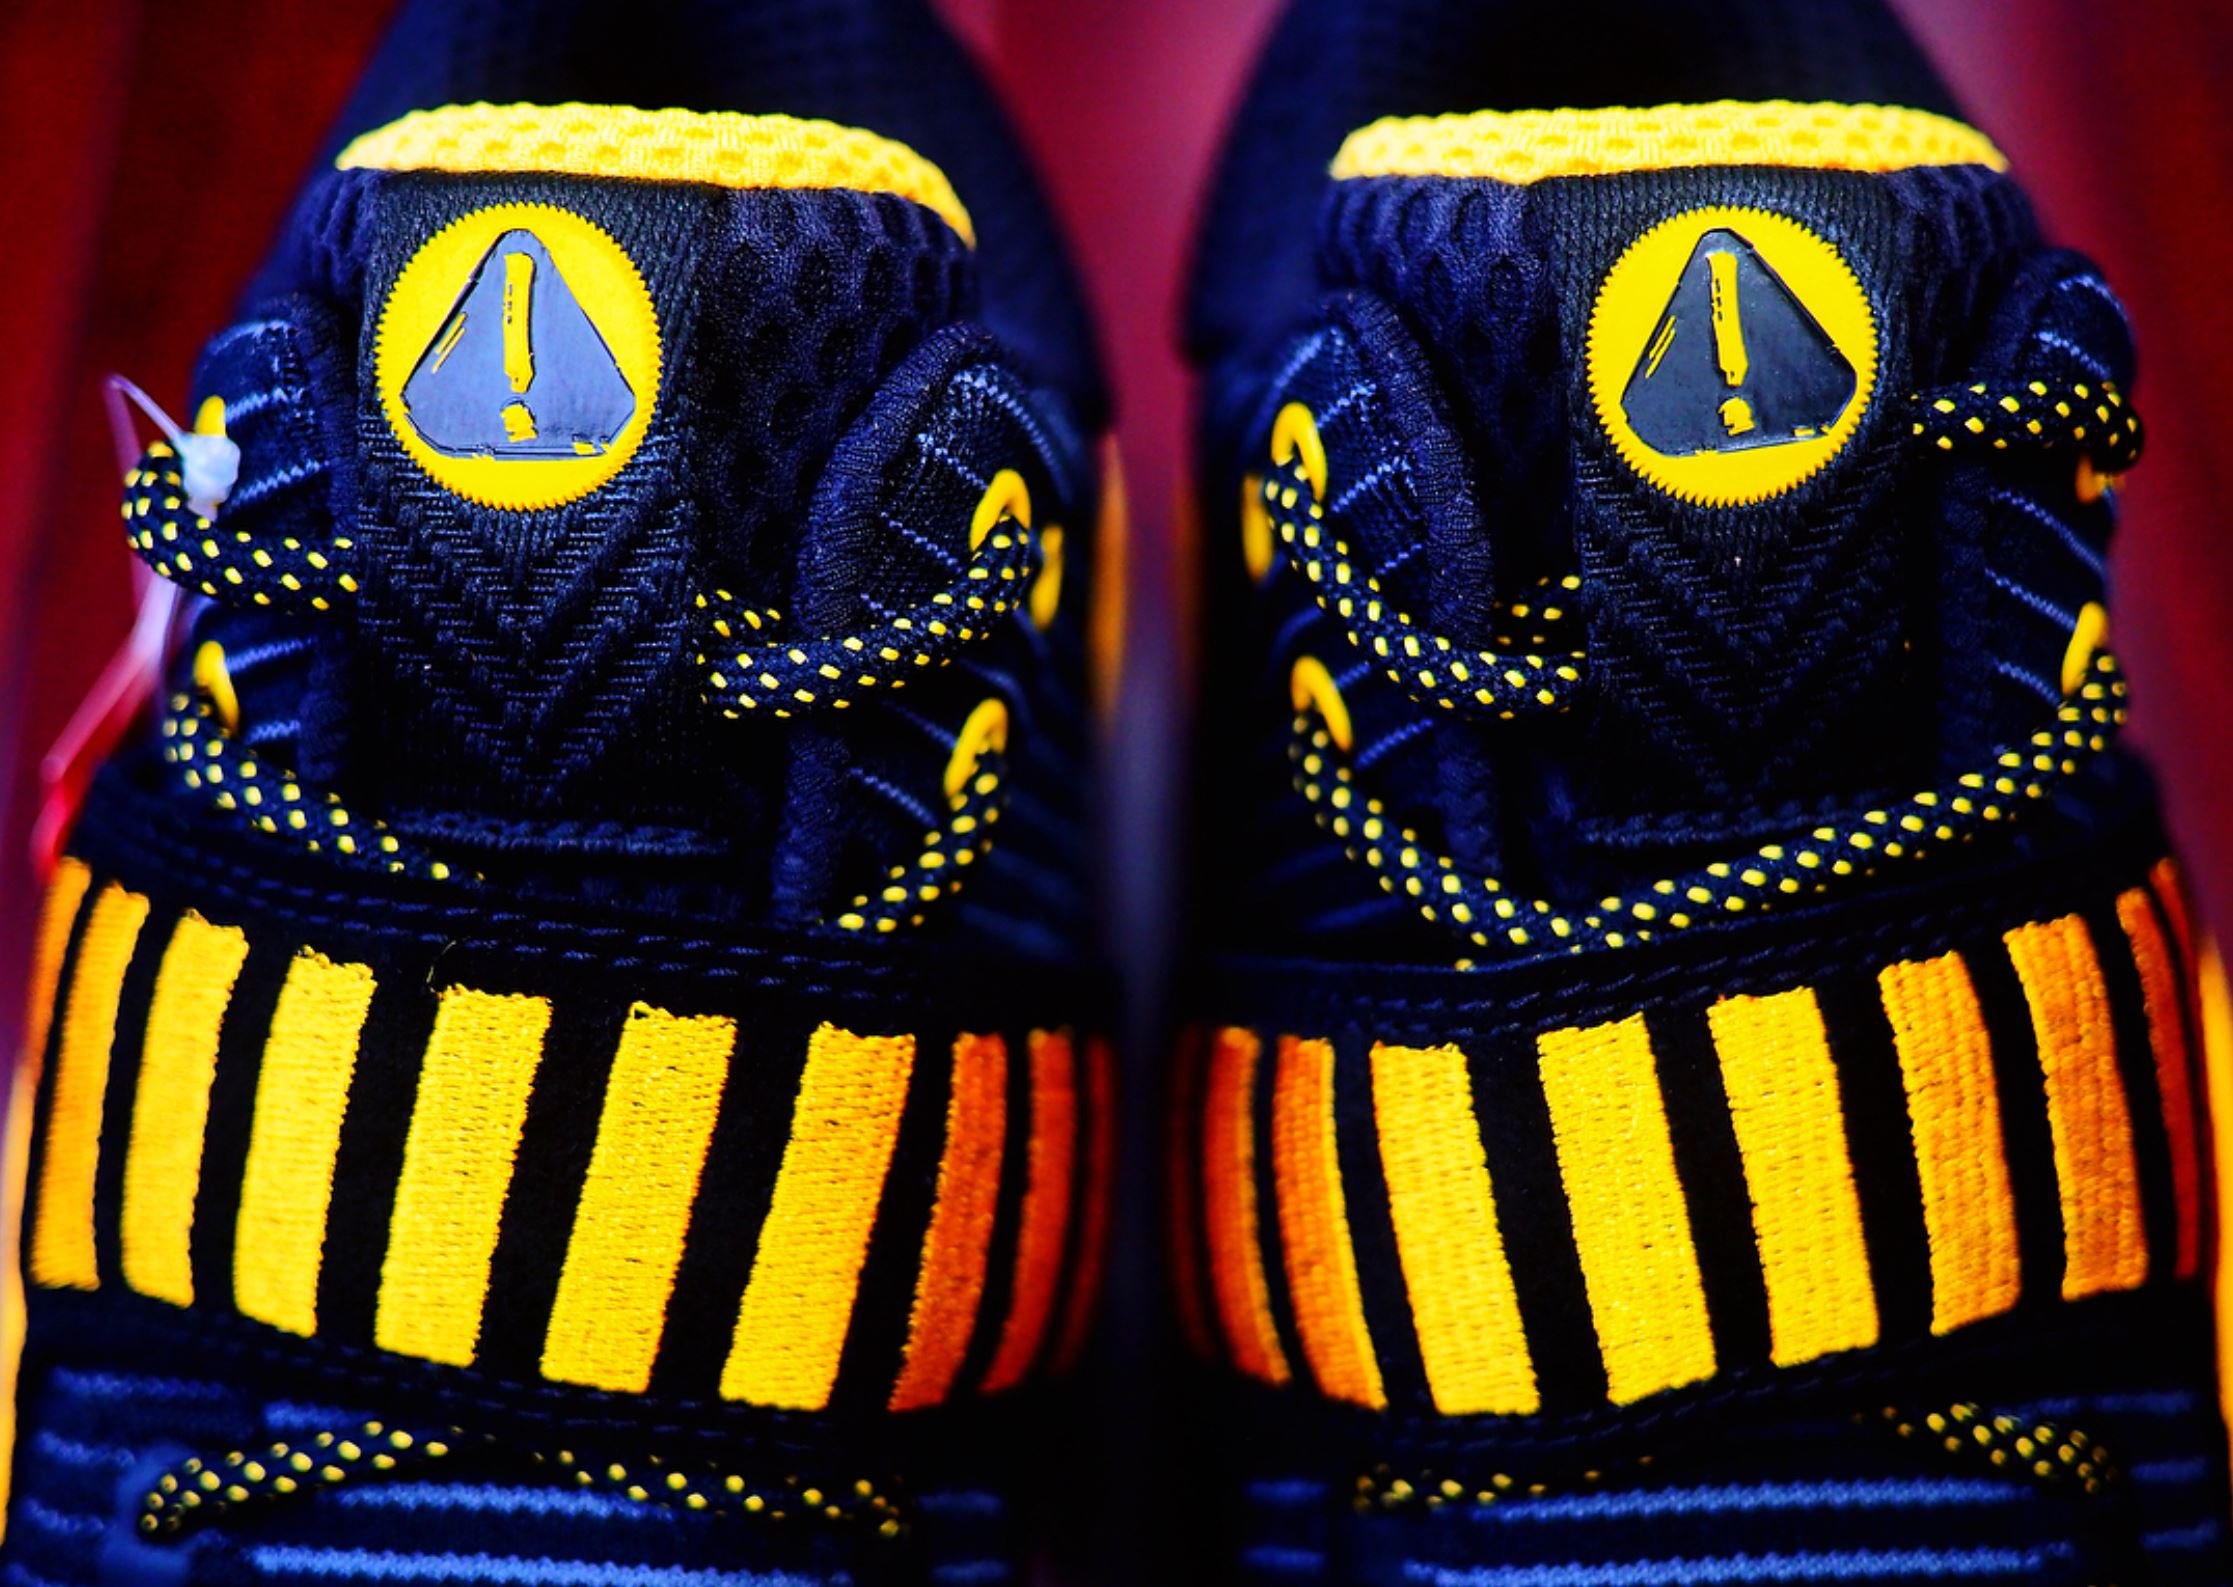 wow 6 caution way of wade 6